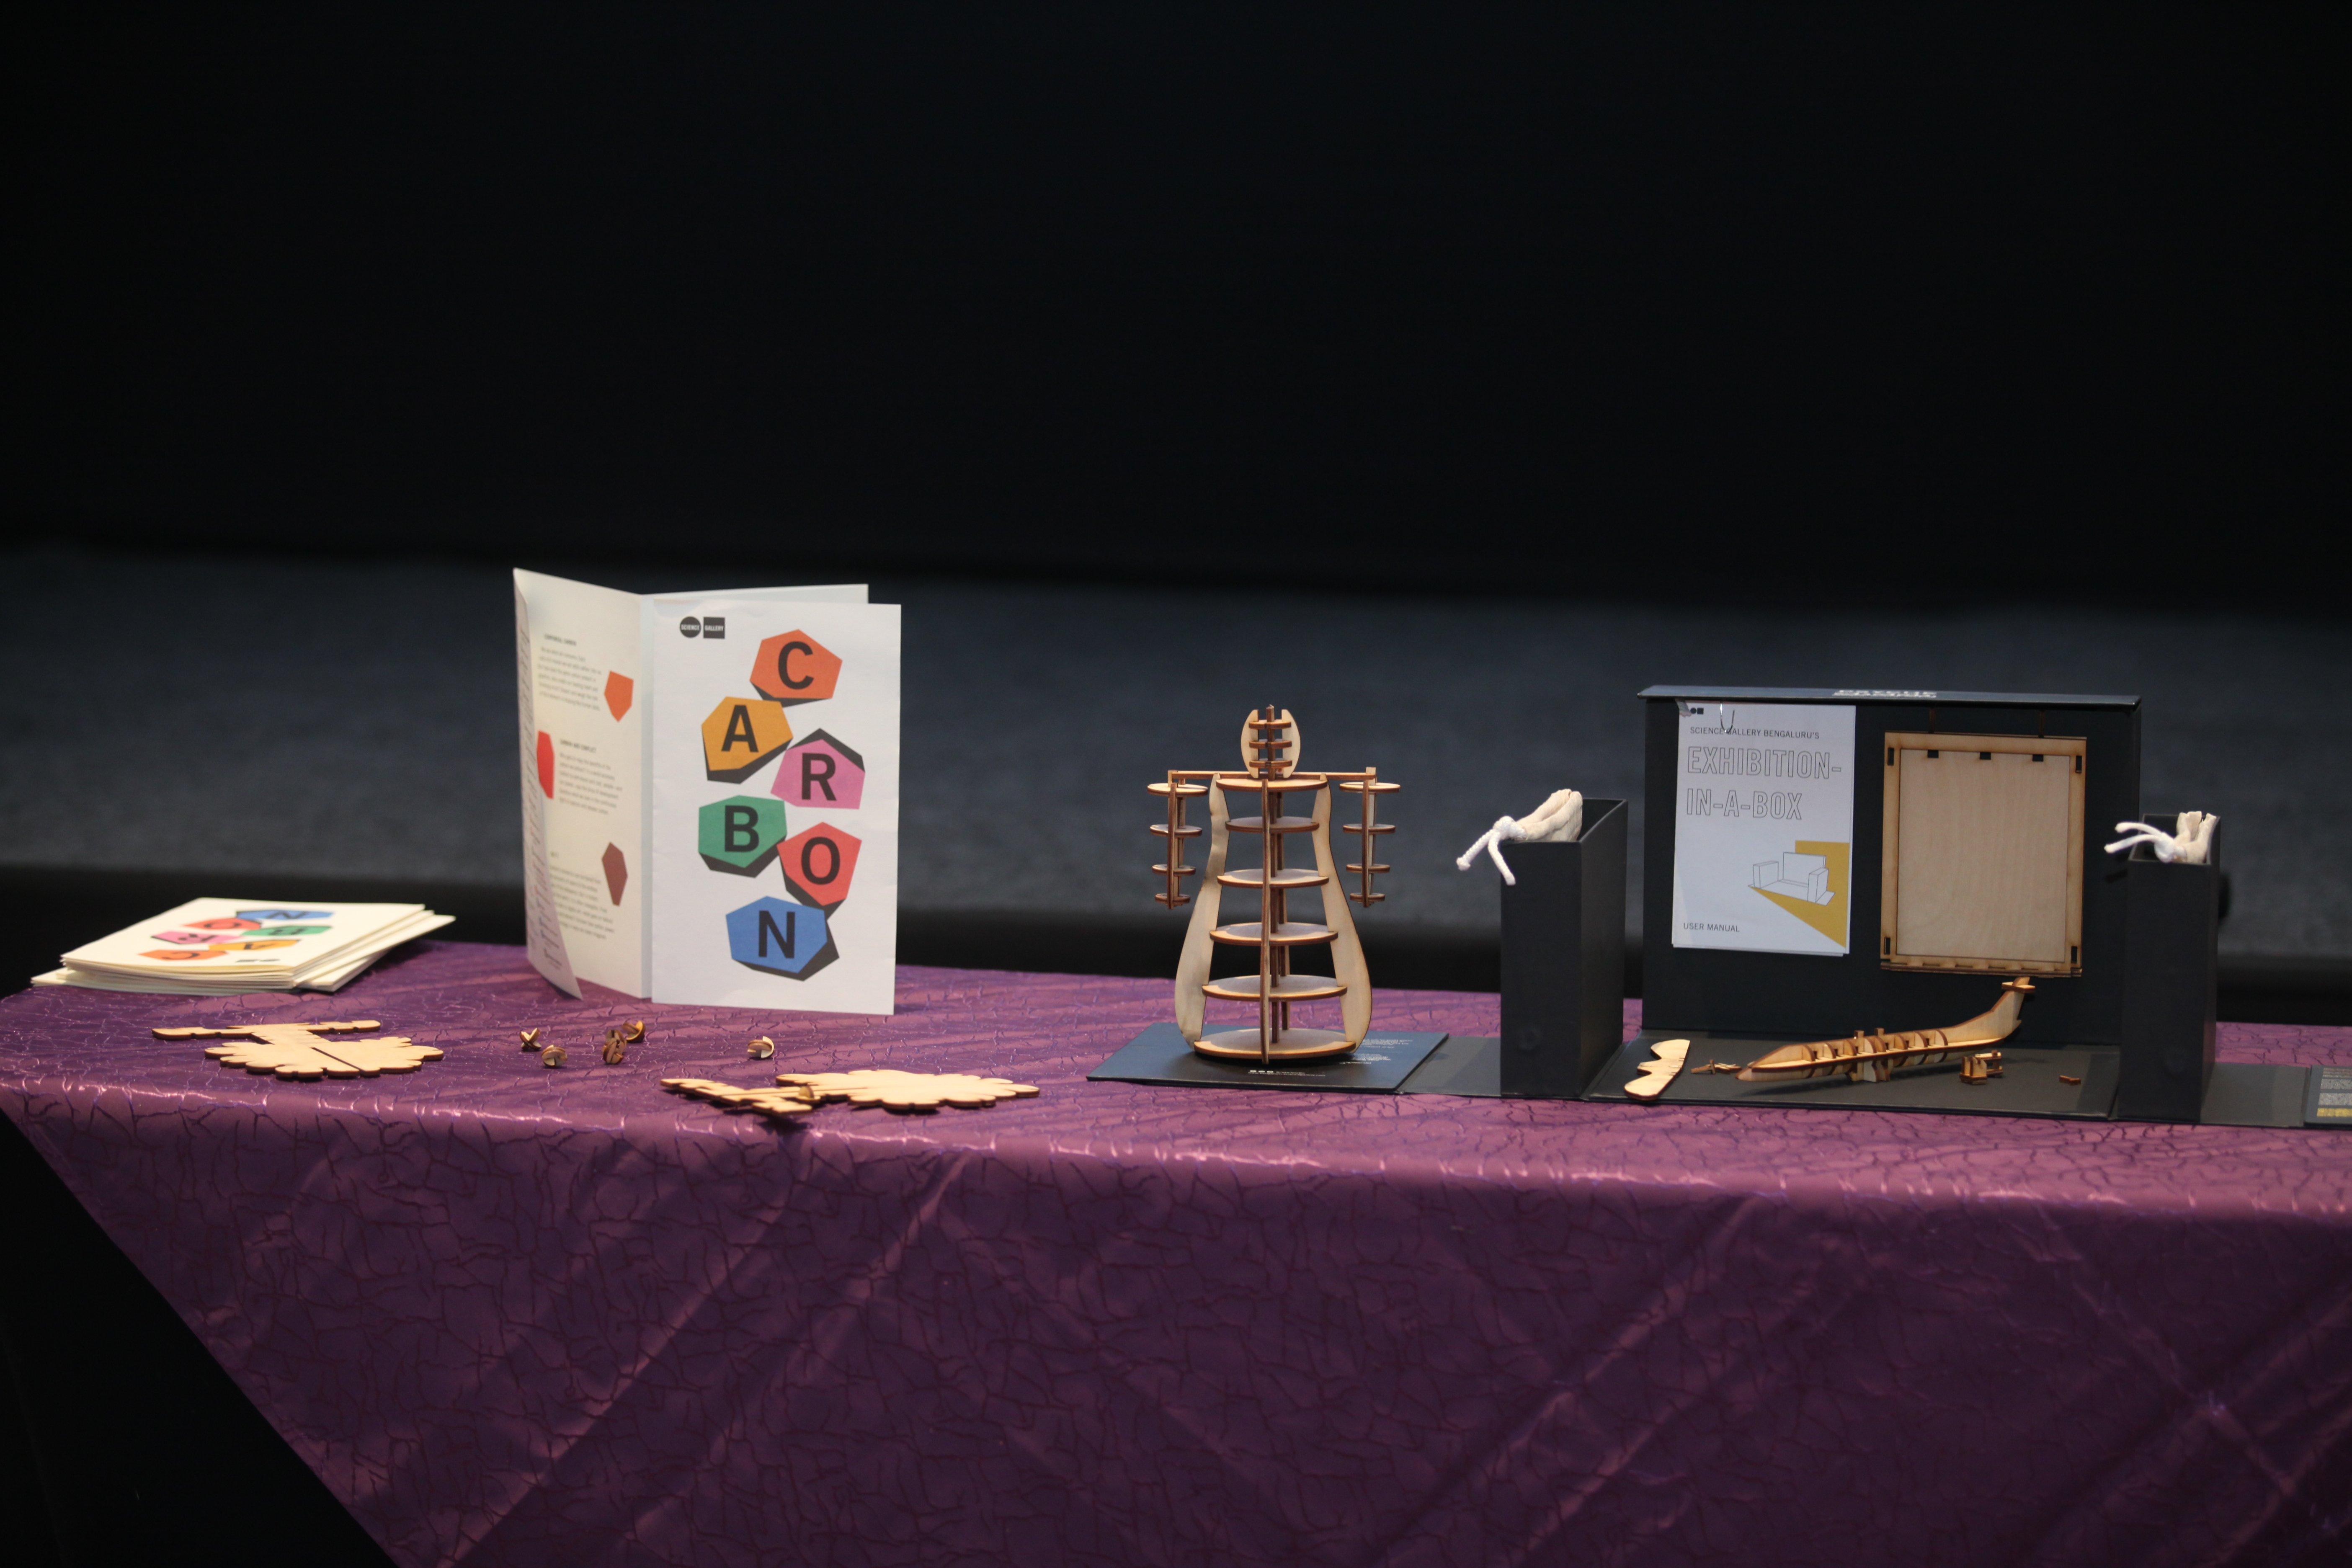 'Exhibition-in-a-box' presented by Science Gallery Bengaluru. Photo Credits: IndiaBioscience